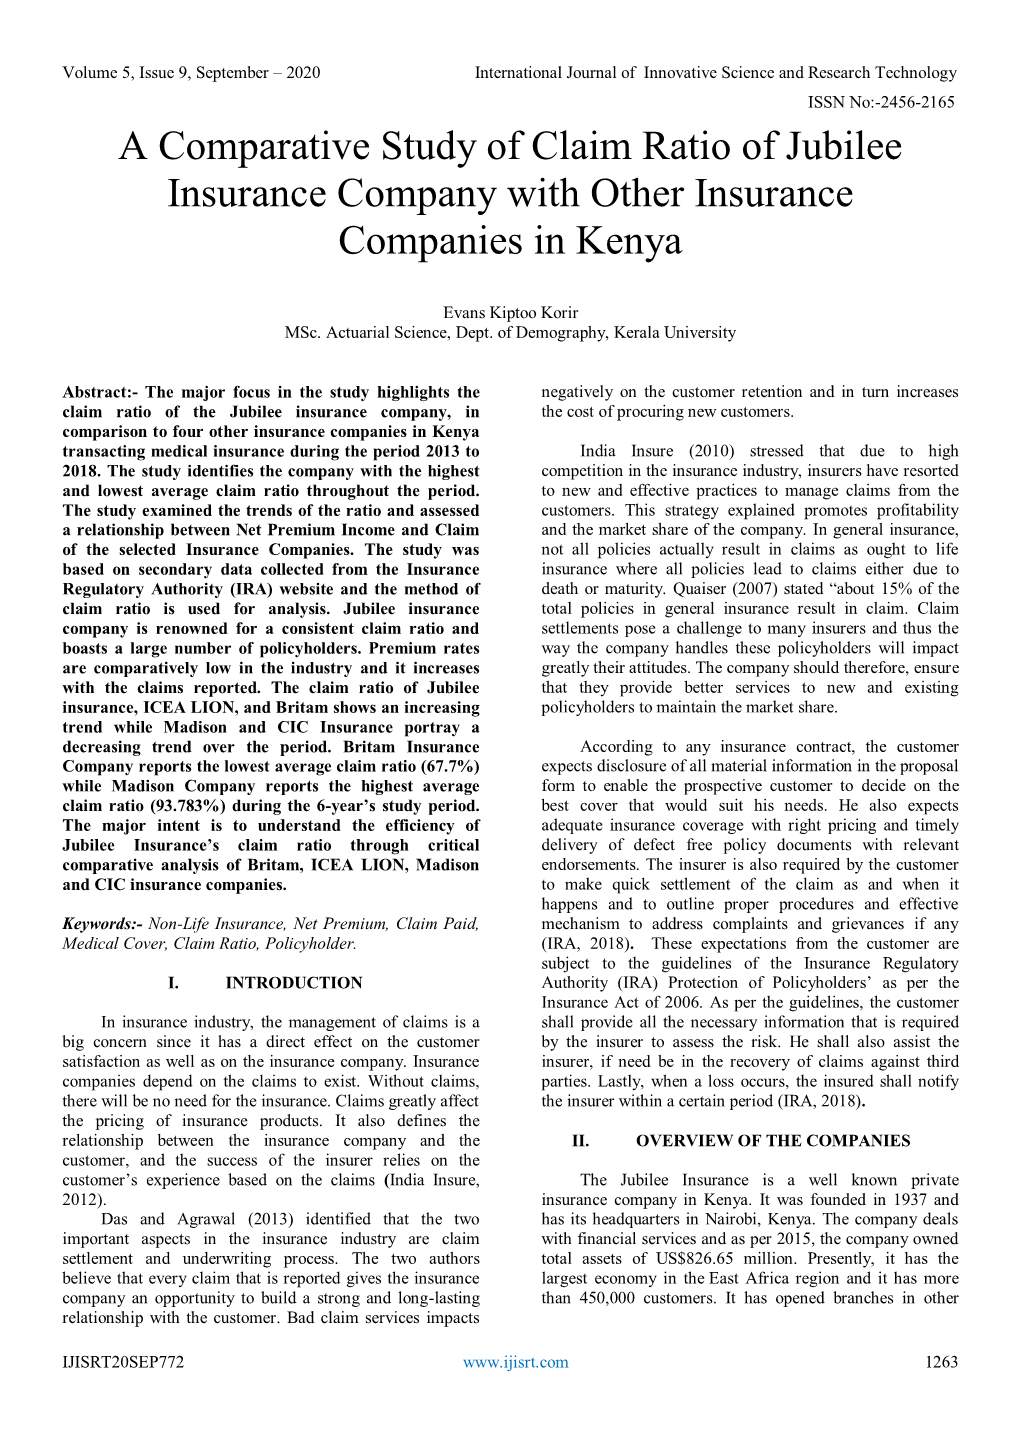 A Comparative Study of Claim Ratio of Jubilee Insurance Company with Other Insurance Companies in Kenya